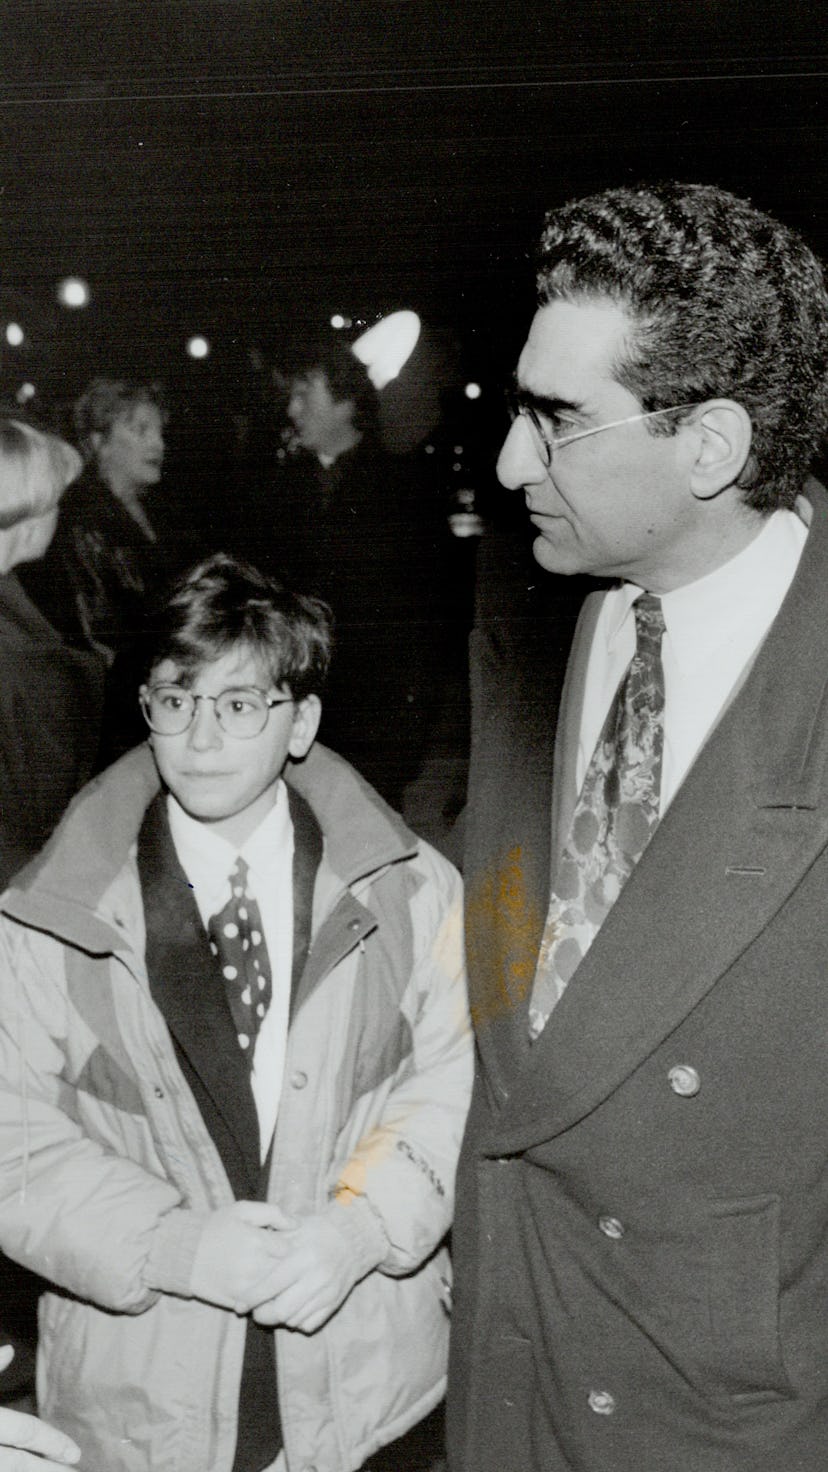 Dan and Eugene Levy